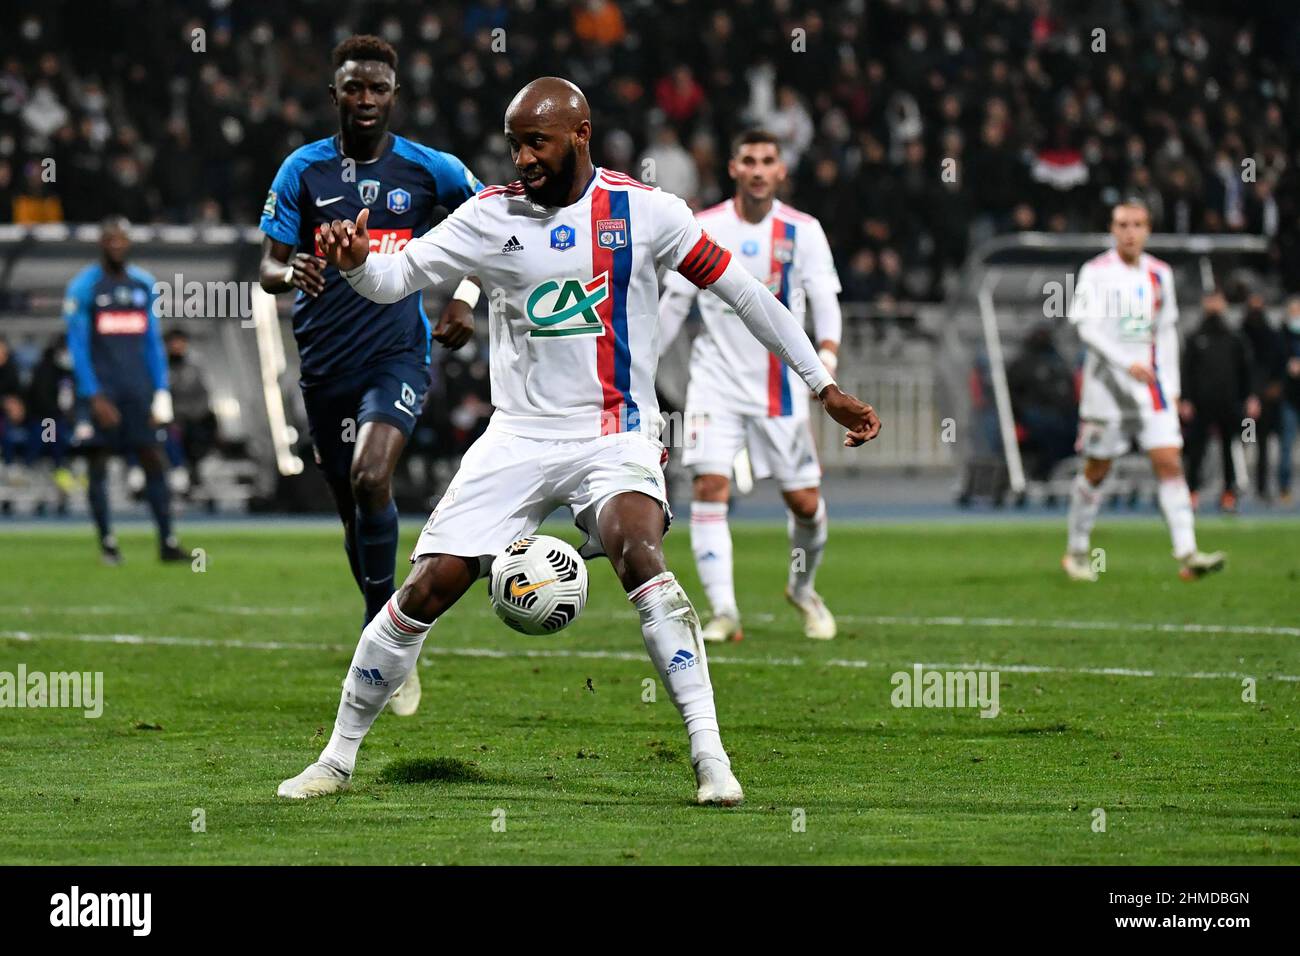 Paris FC - Olympique Lyonnais   Coupe de France, Round of 32 Moussa Dembele's goal during the round of 32 of the French Cup, at the Stade Charlety, be Stock Photo